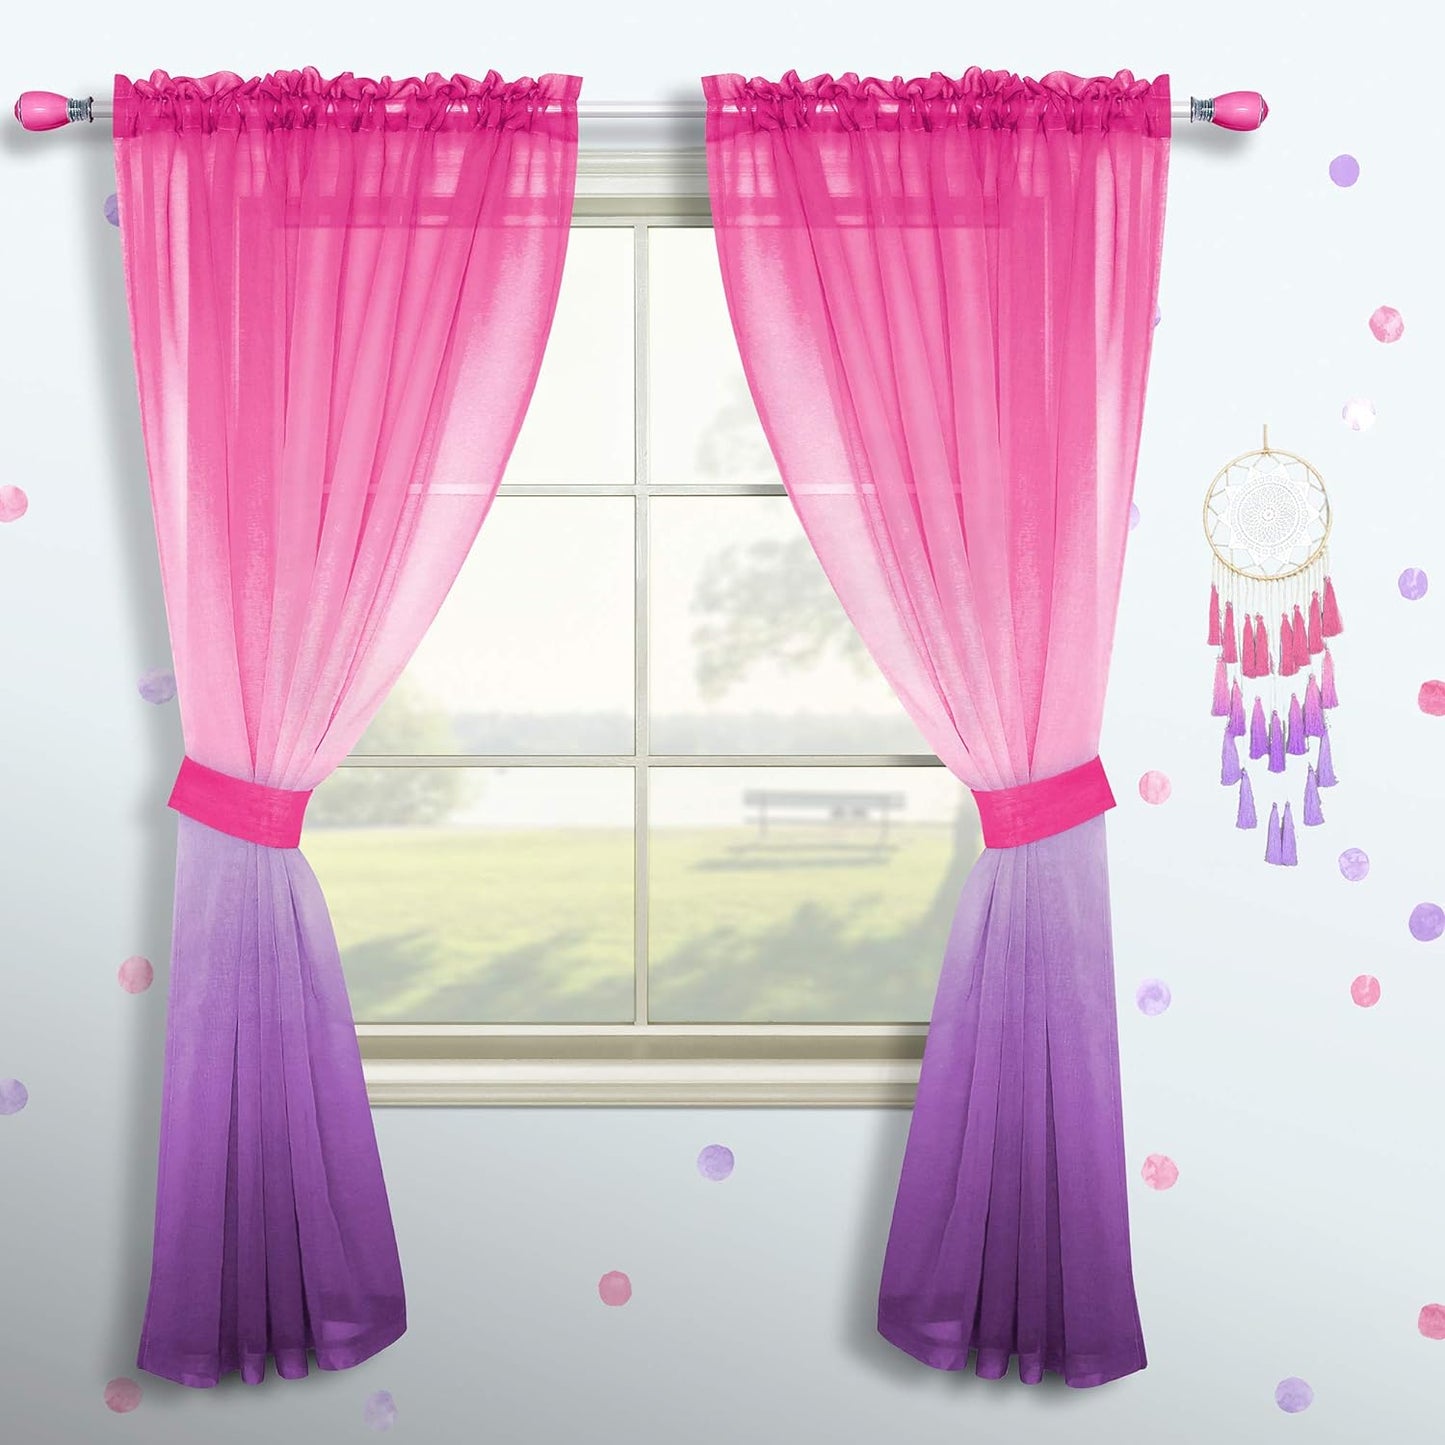 Pink and Purple Curtains for Girls Bedroom Decor Set 1 Single Panel Pocket Window Voile Pastel Sheer Ombre Rainbow Curtain for Kid Room Decoration Teen Princess 63 Inch Length Gradient Lilac Lavender  MRS.NATURALL TEXTILE Pink And Purple 52X84 